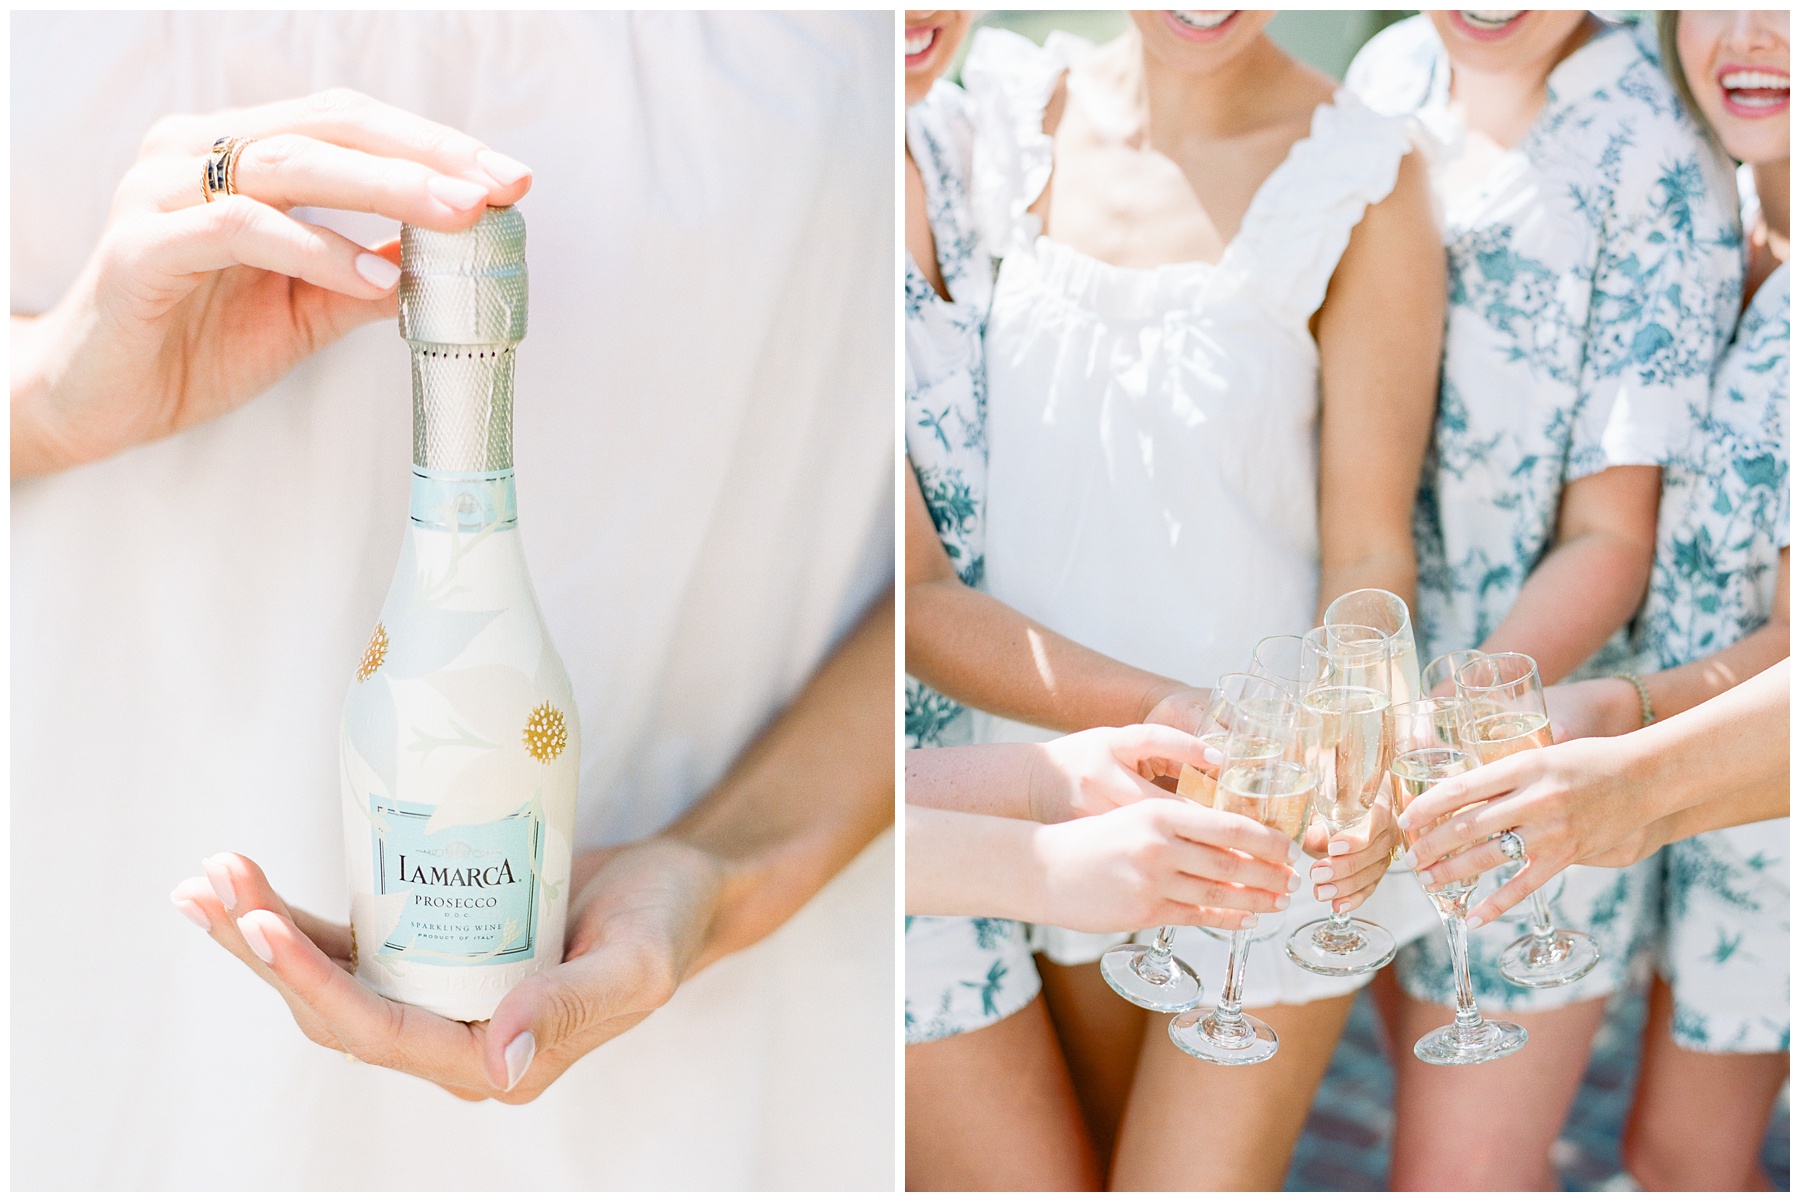 bride and bridesmaids hold champagne glasses during prep for wedding day